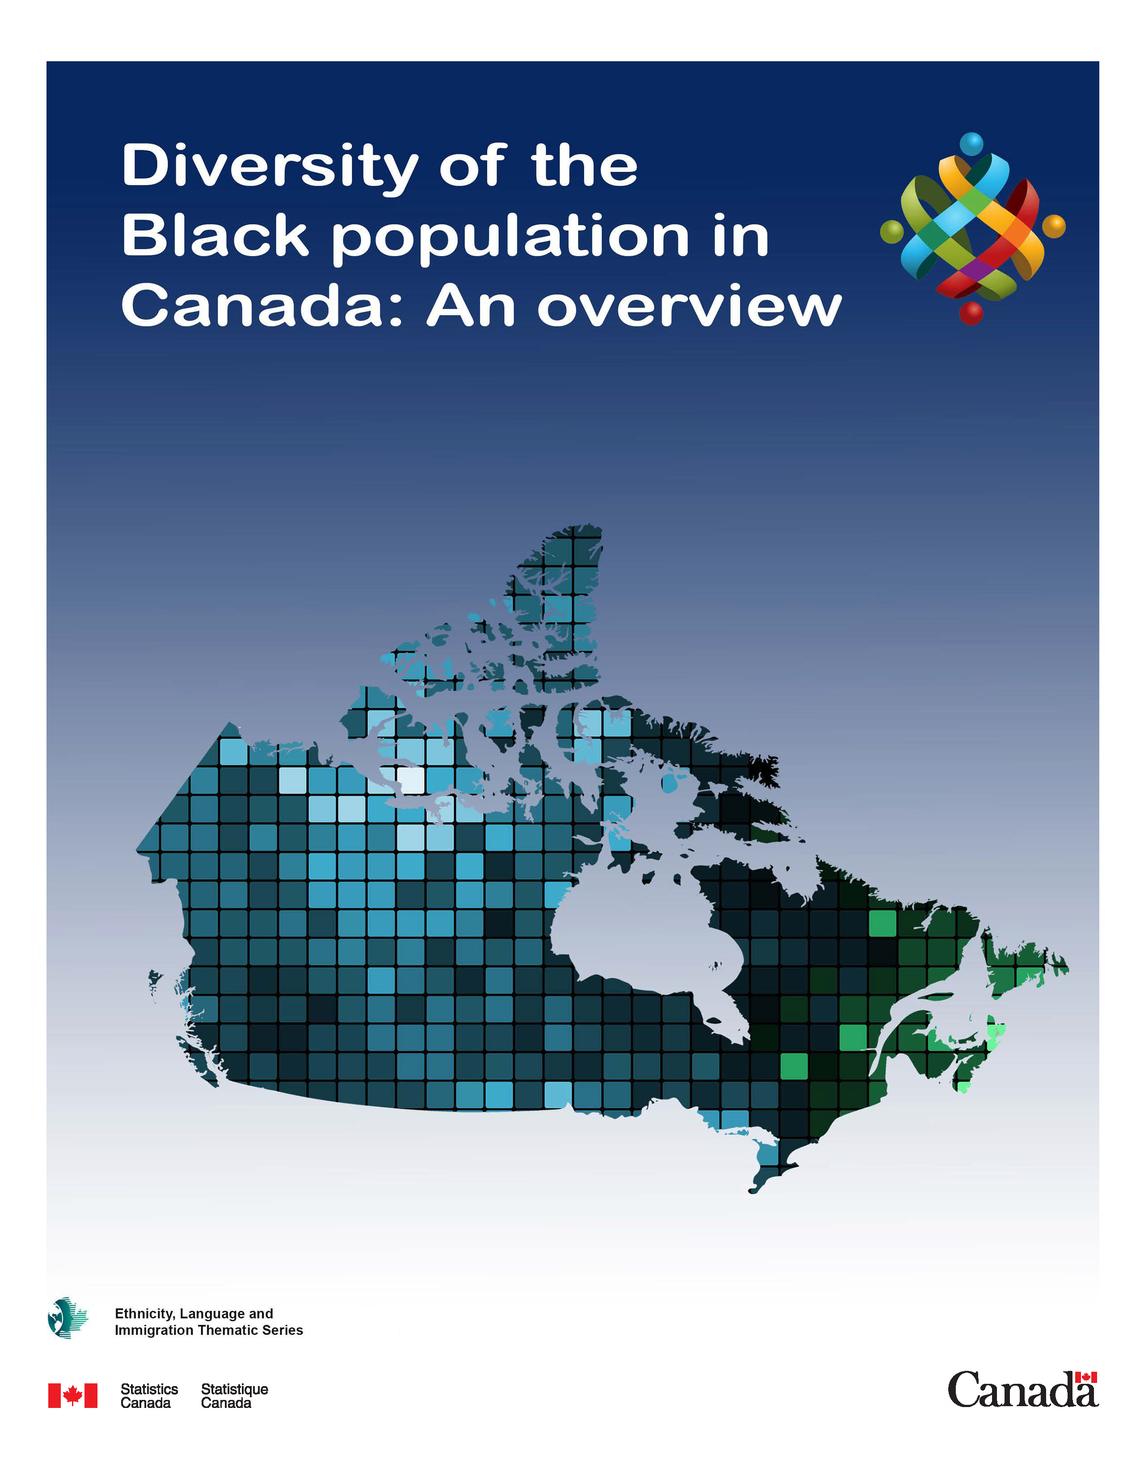 Diversity of the Black population in Canada: An overview